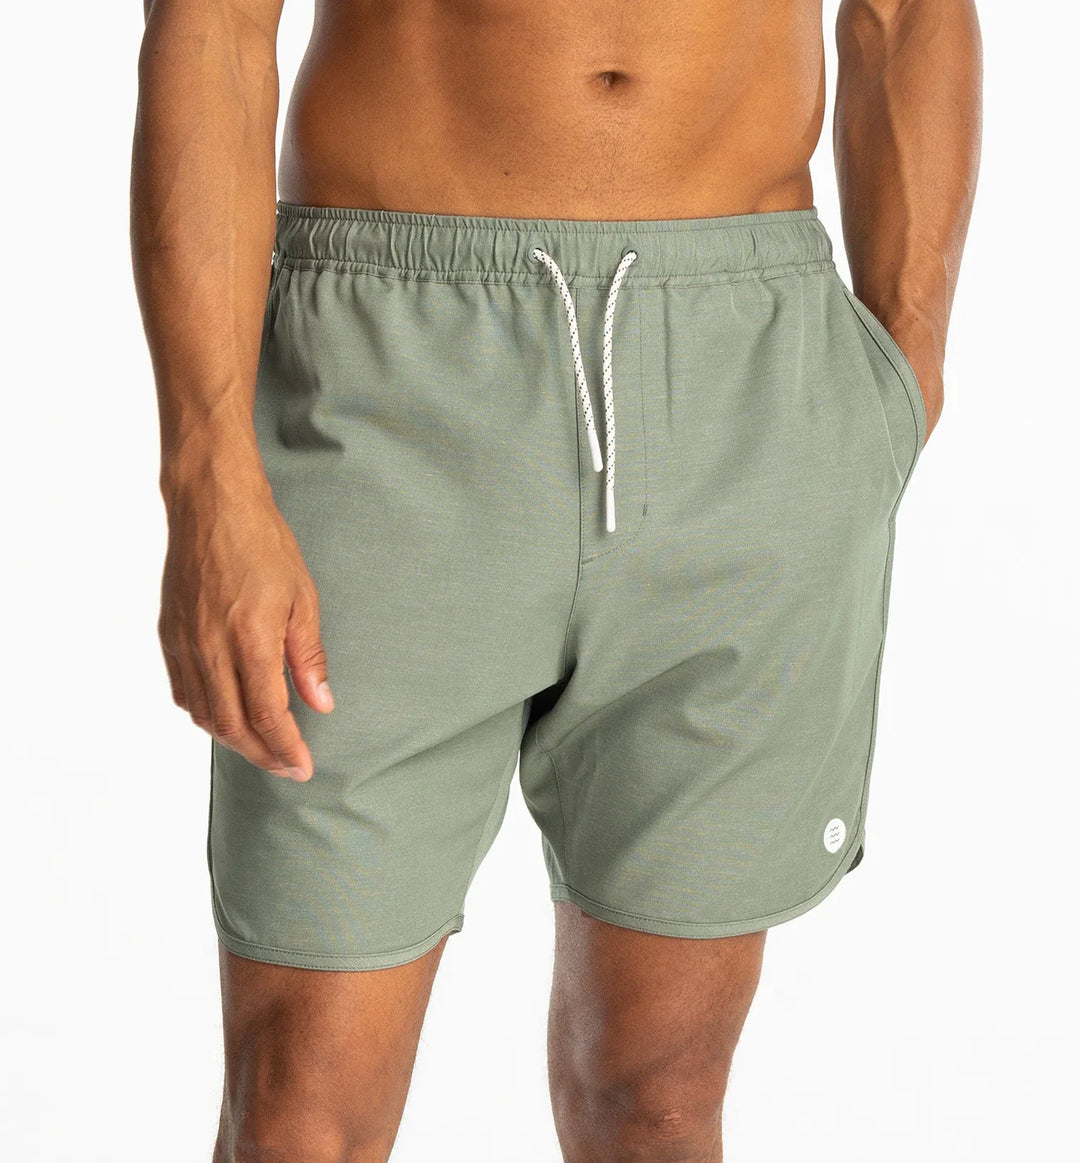 Free Fly Men's Reverb Short - AGAVE GREEN - Sun Diego Boardshop